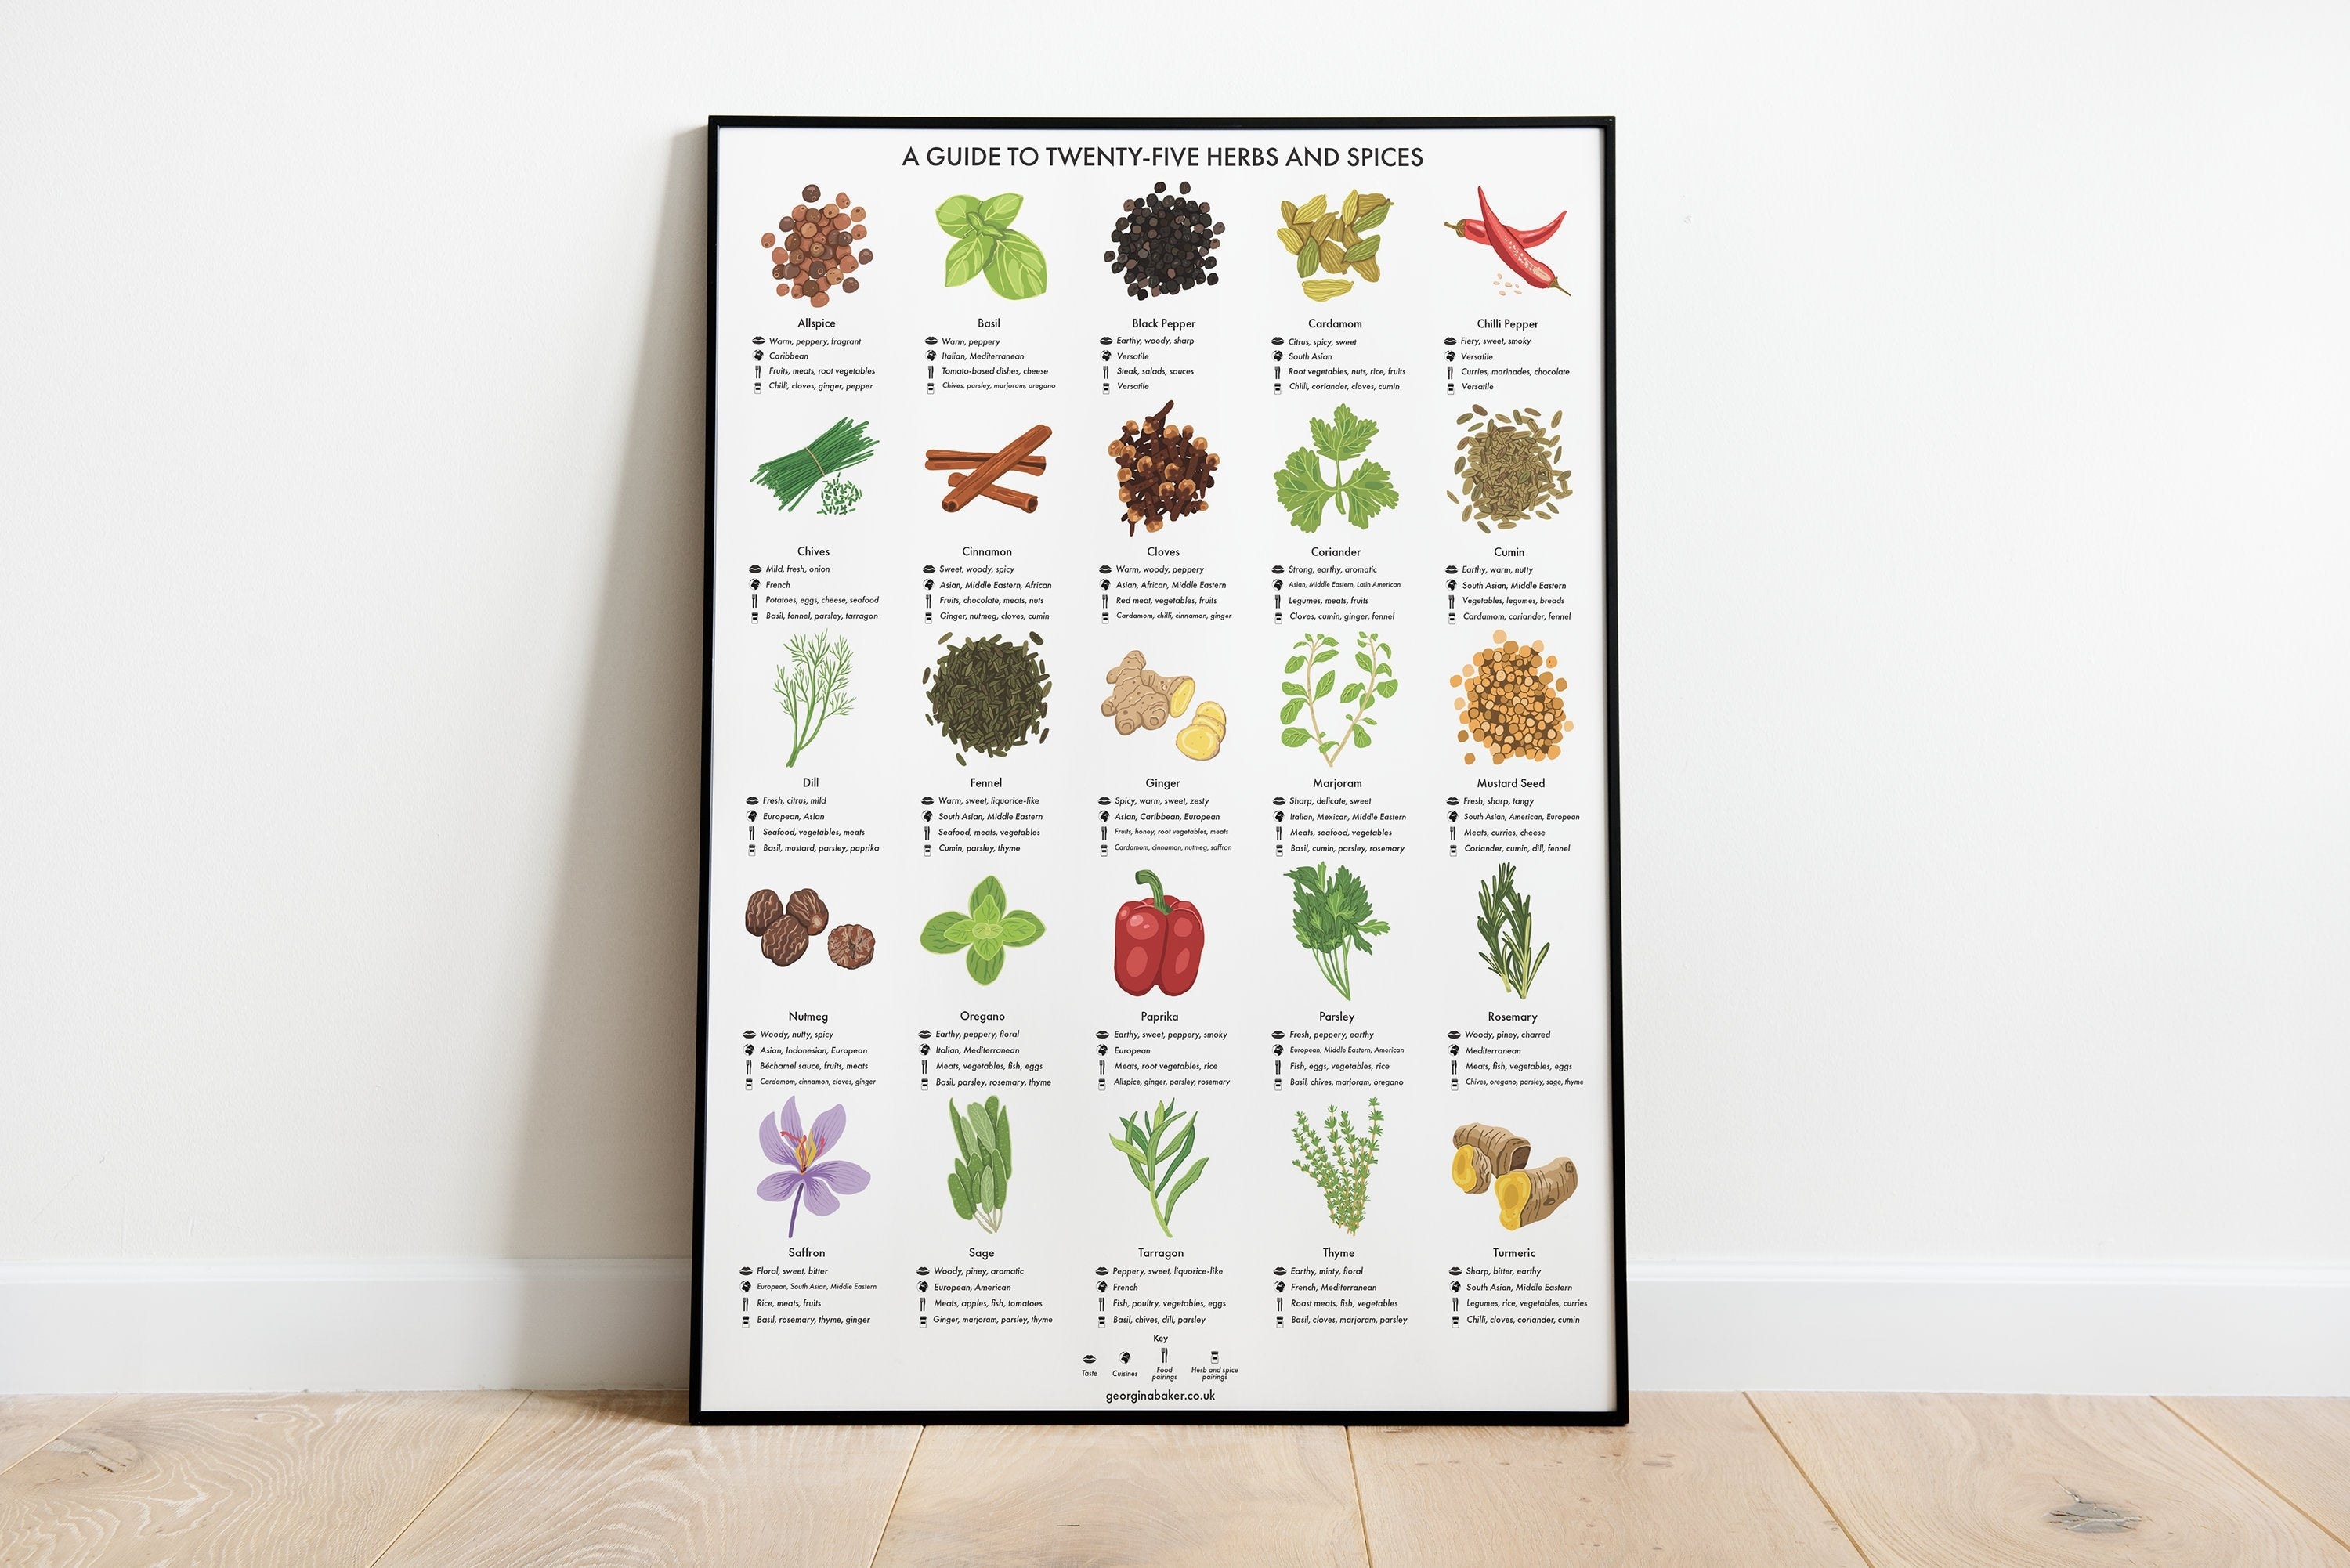 The print, featuring colorful illustrations of 25 herbs and spices, plus some information about each